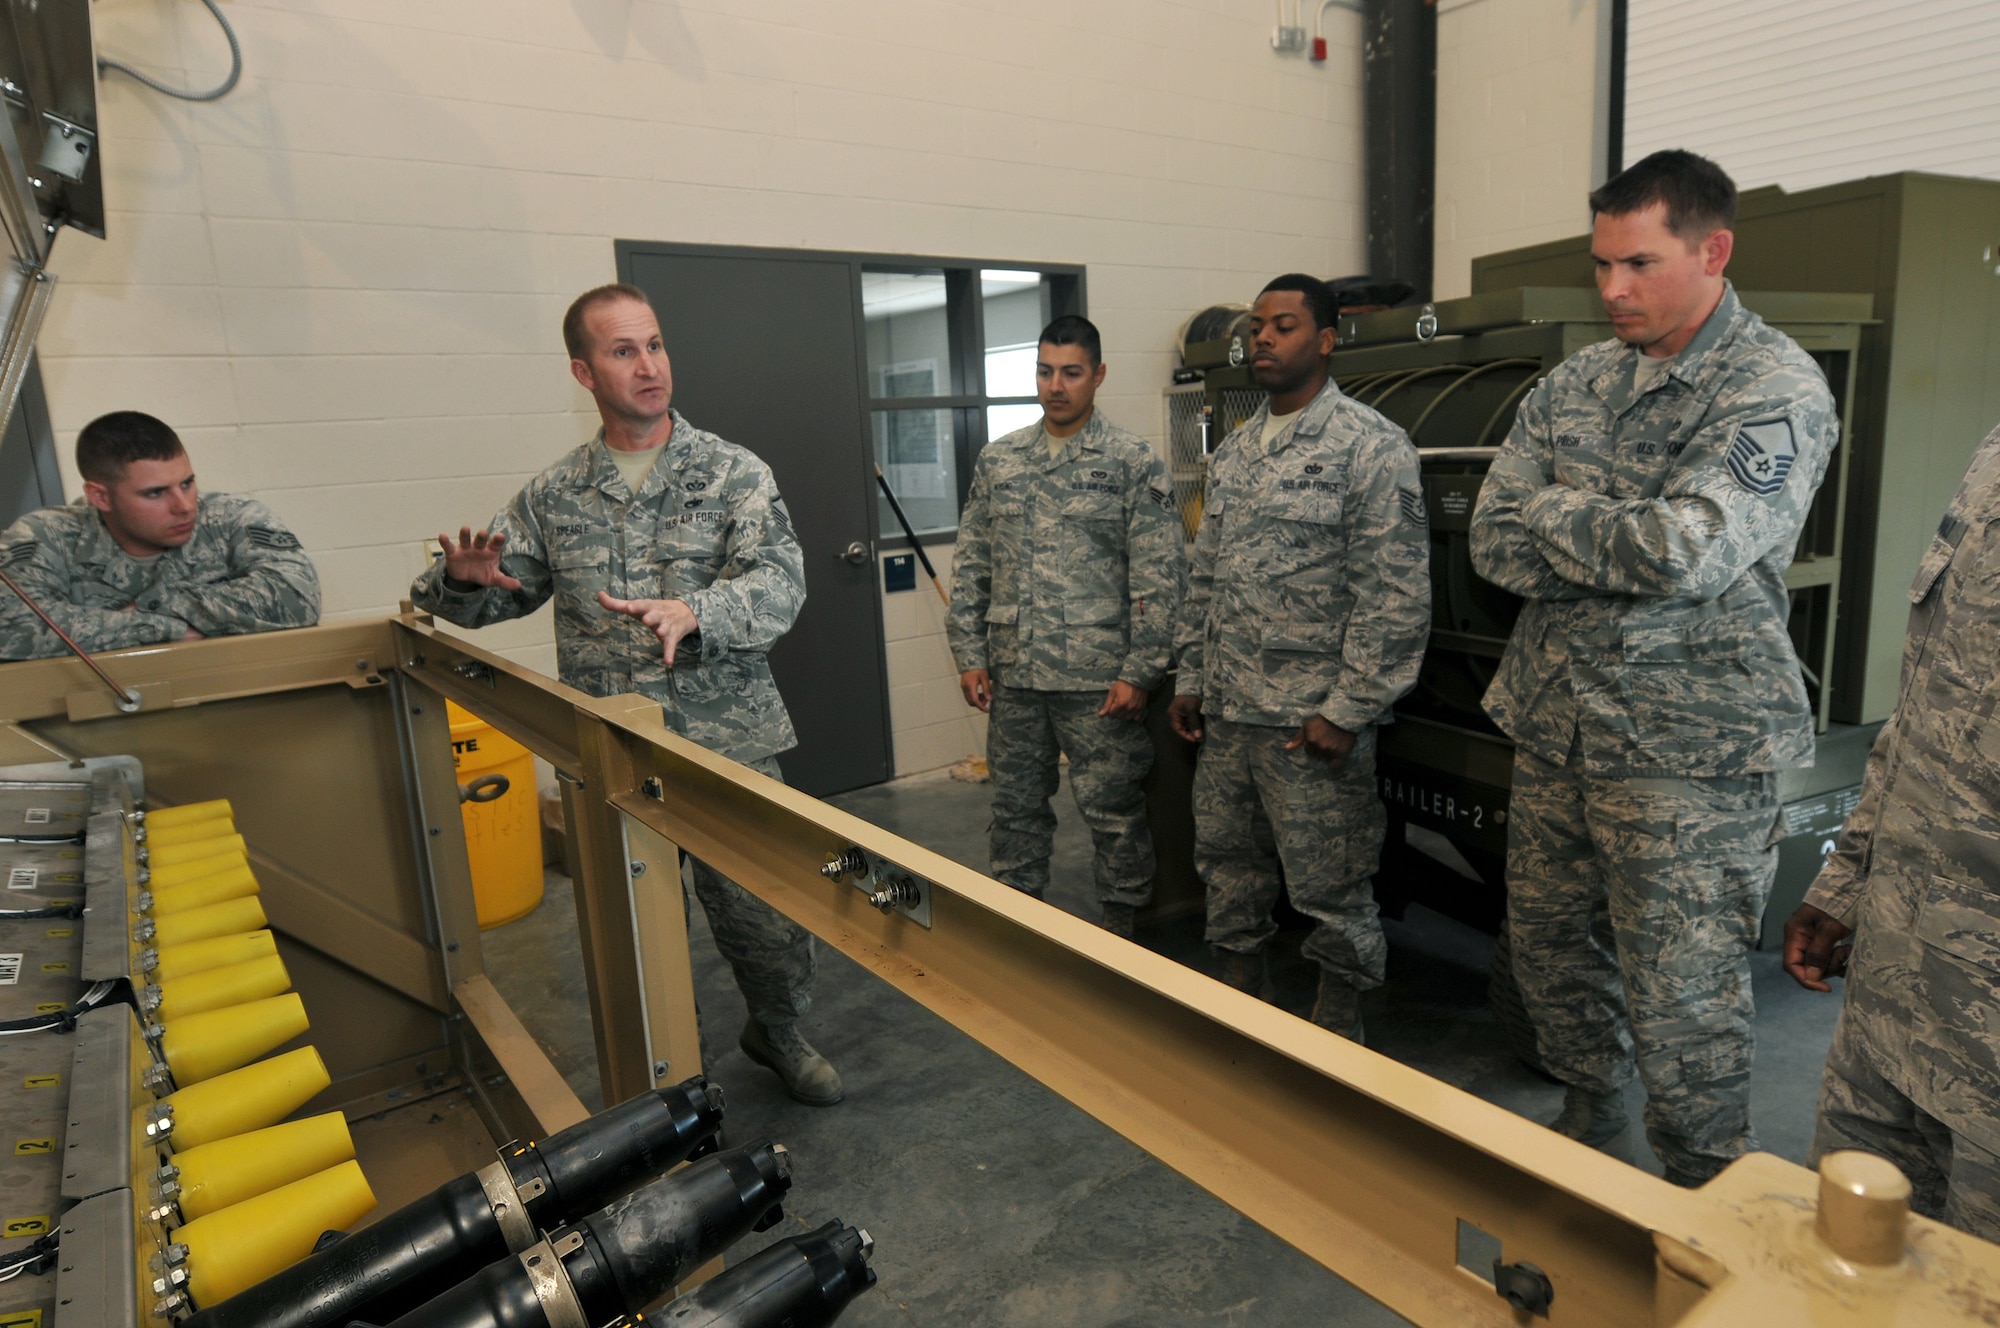 NEW LONDON, N.C. -- During a Mission Essential Equipment Training class held in March 2013, Master Sgt. Christopher R. Speagle, Prime BEEF Manager, 145th Civil Engineering Squadron demonstrates operations on a piece of equipment called a Primary Switching Center. The class taught at the 145th North Carolina Air National Guard Regional Training Site in New London, N. C., was a mixture of Active and Guard personnel. Member's home stations included Charleston and Whiteman Air Force Base and the Oklahoma Air National Guard. (National Guard photo by Tech. Sgt. Patricia Findley, 145th Public Affairs)

